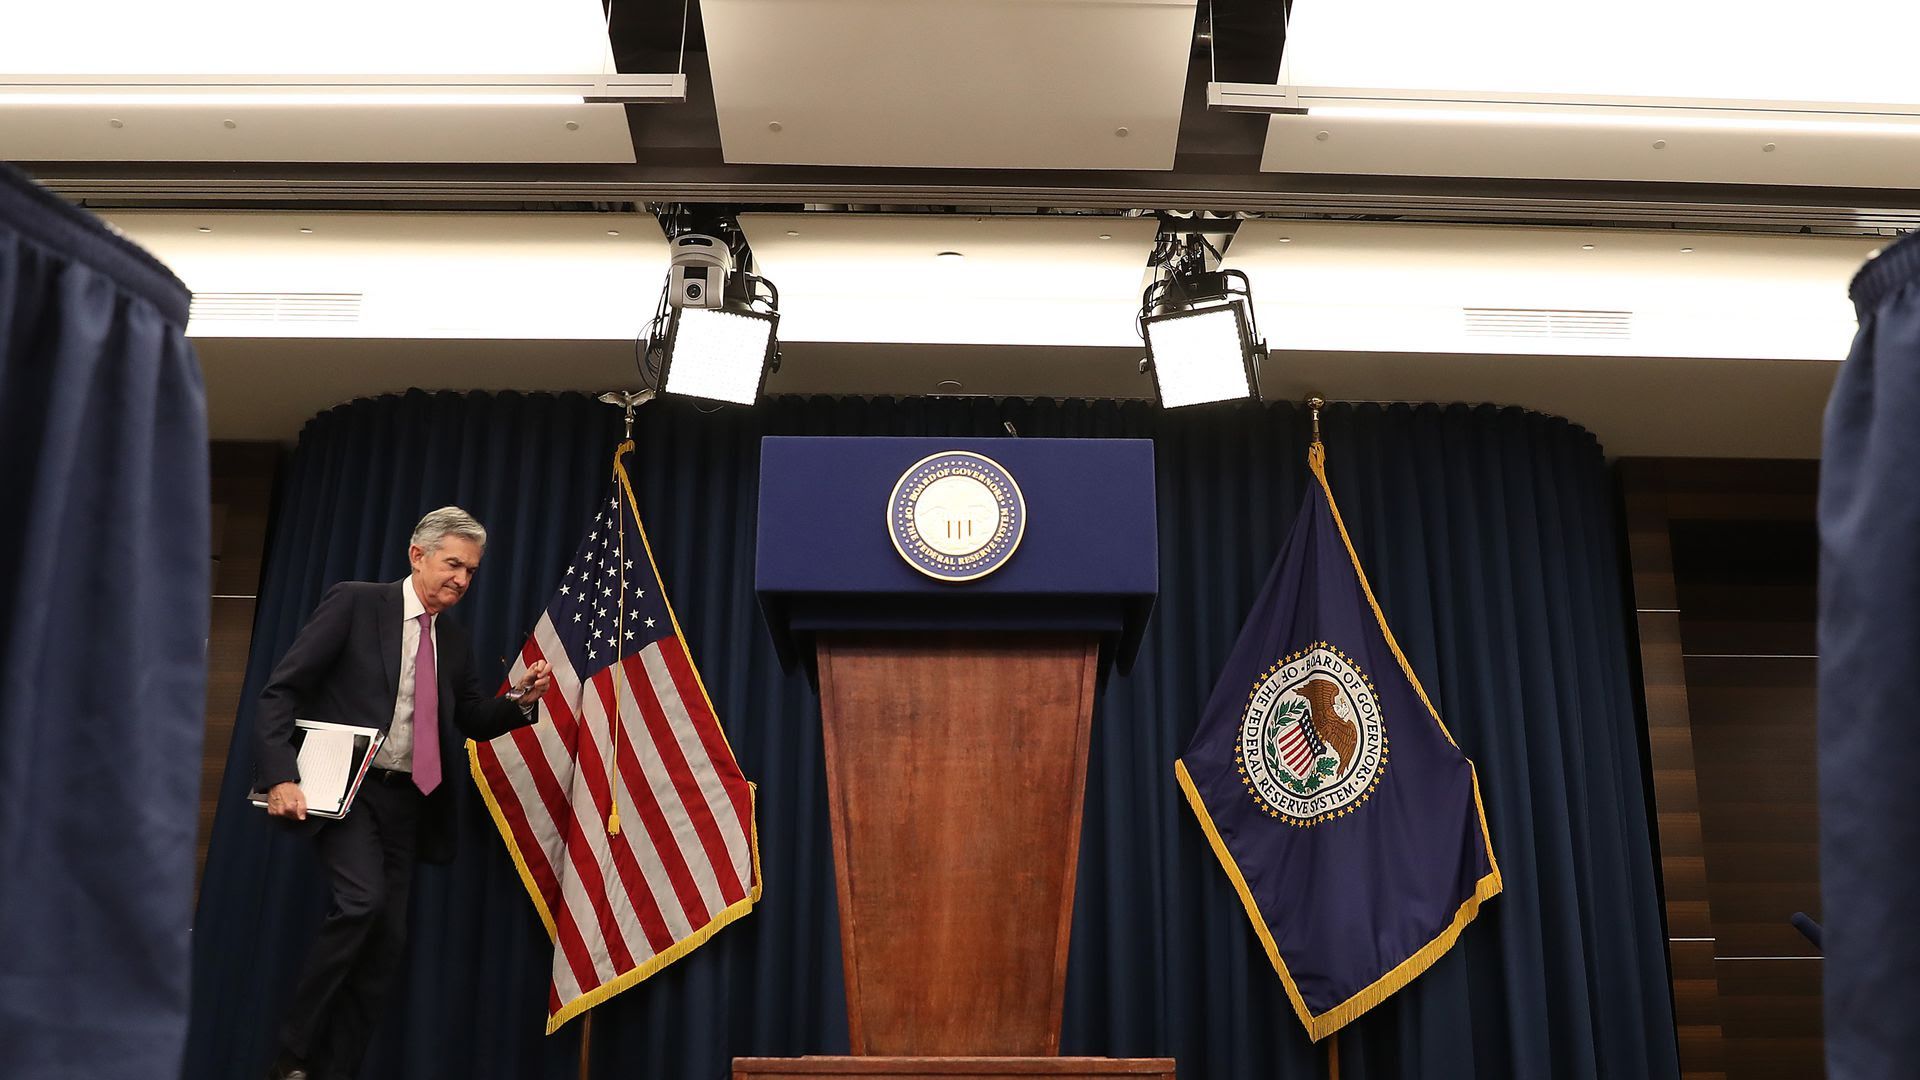 Federal Reserve Board Chairman Jerome Powell walks up to speak during a news conference. Photo: Mark Wilson/Getty Images